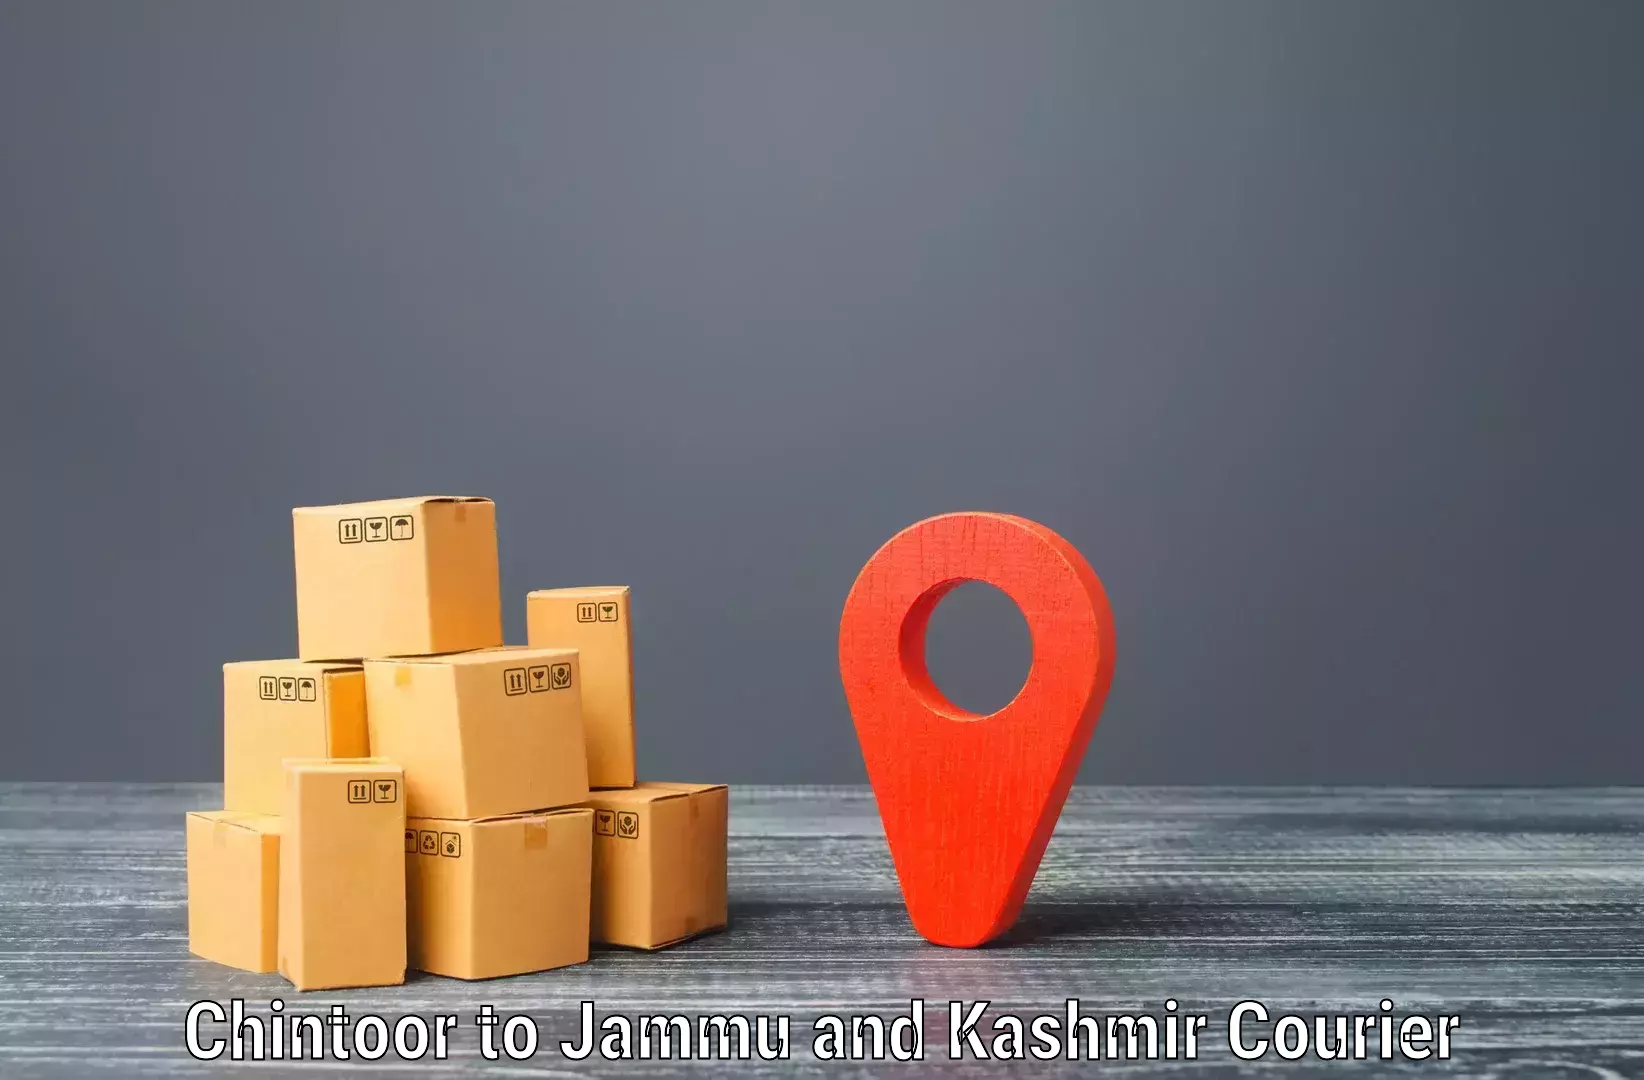 Overnight delivery services Chintoor to Bhaderwah